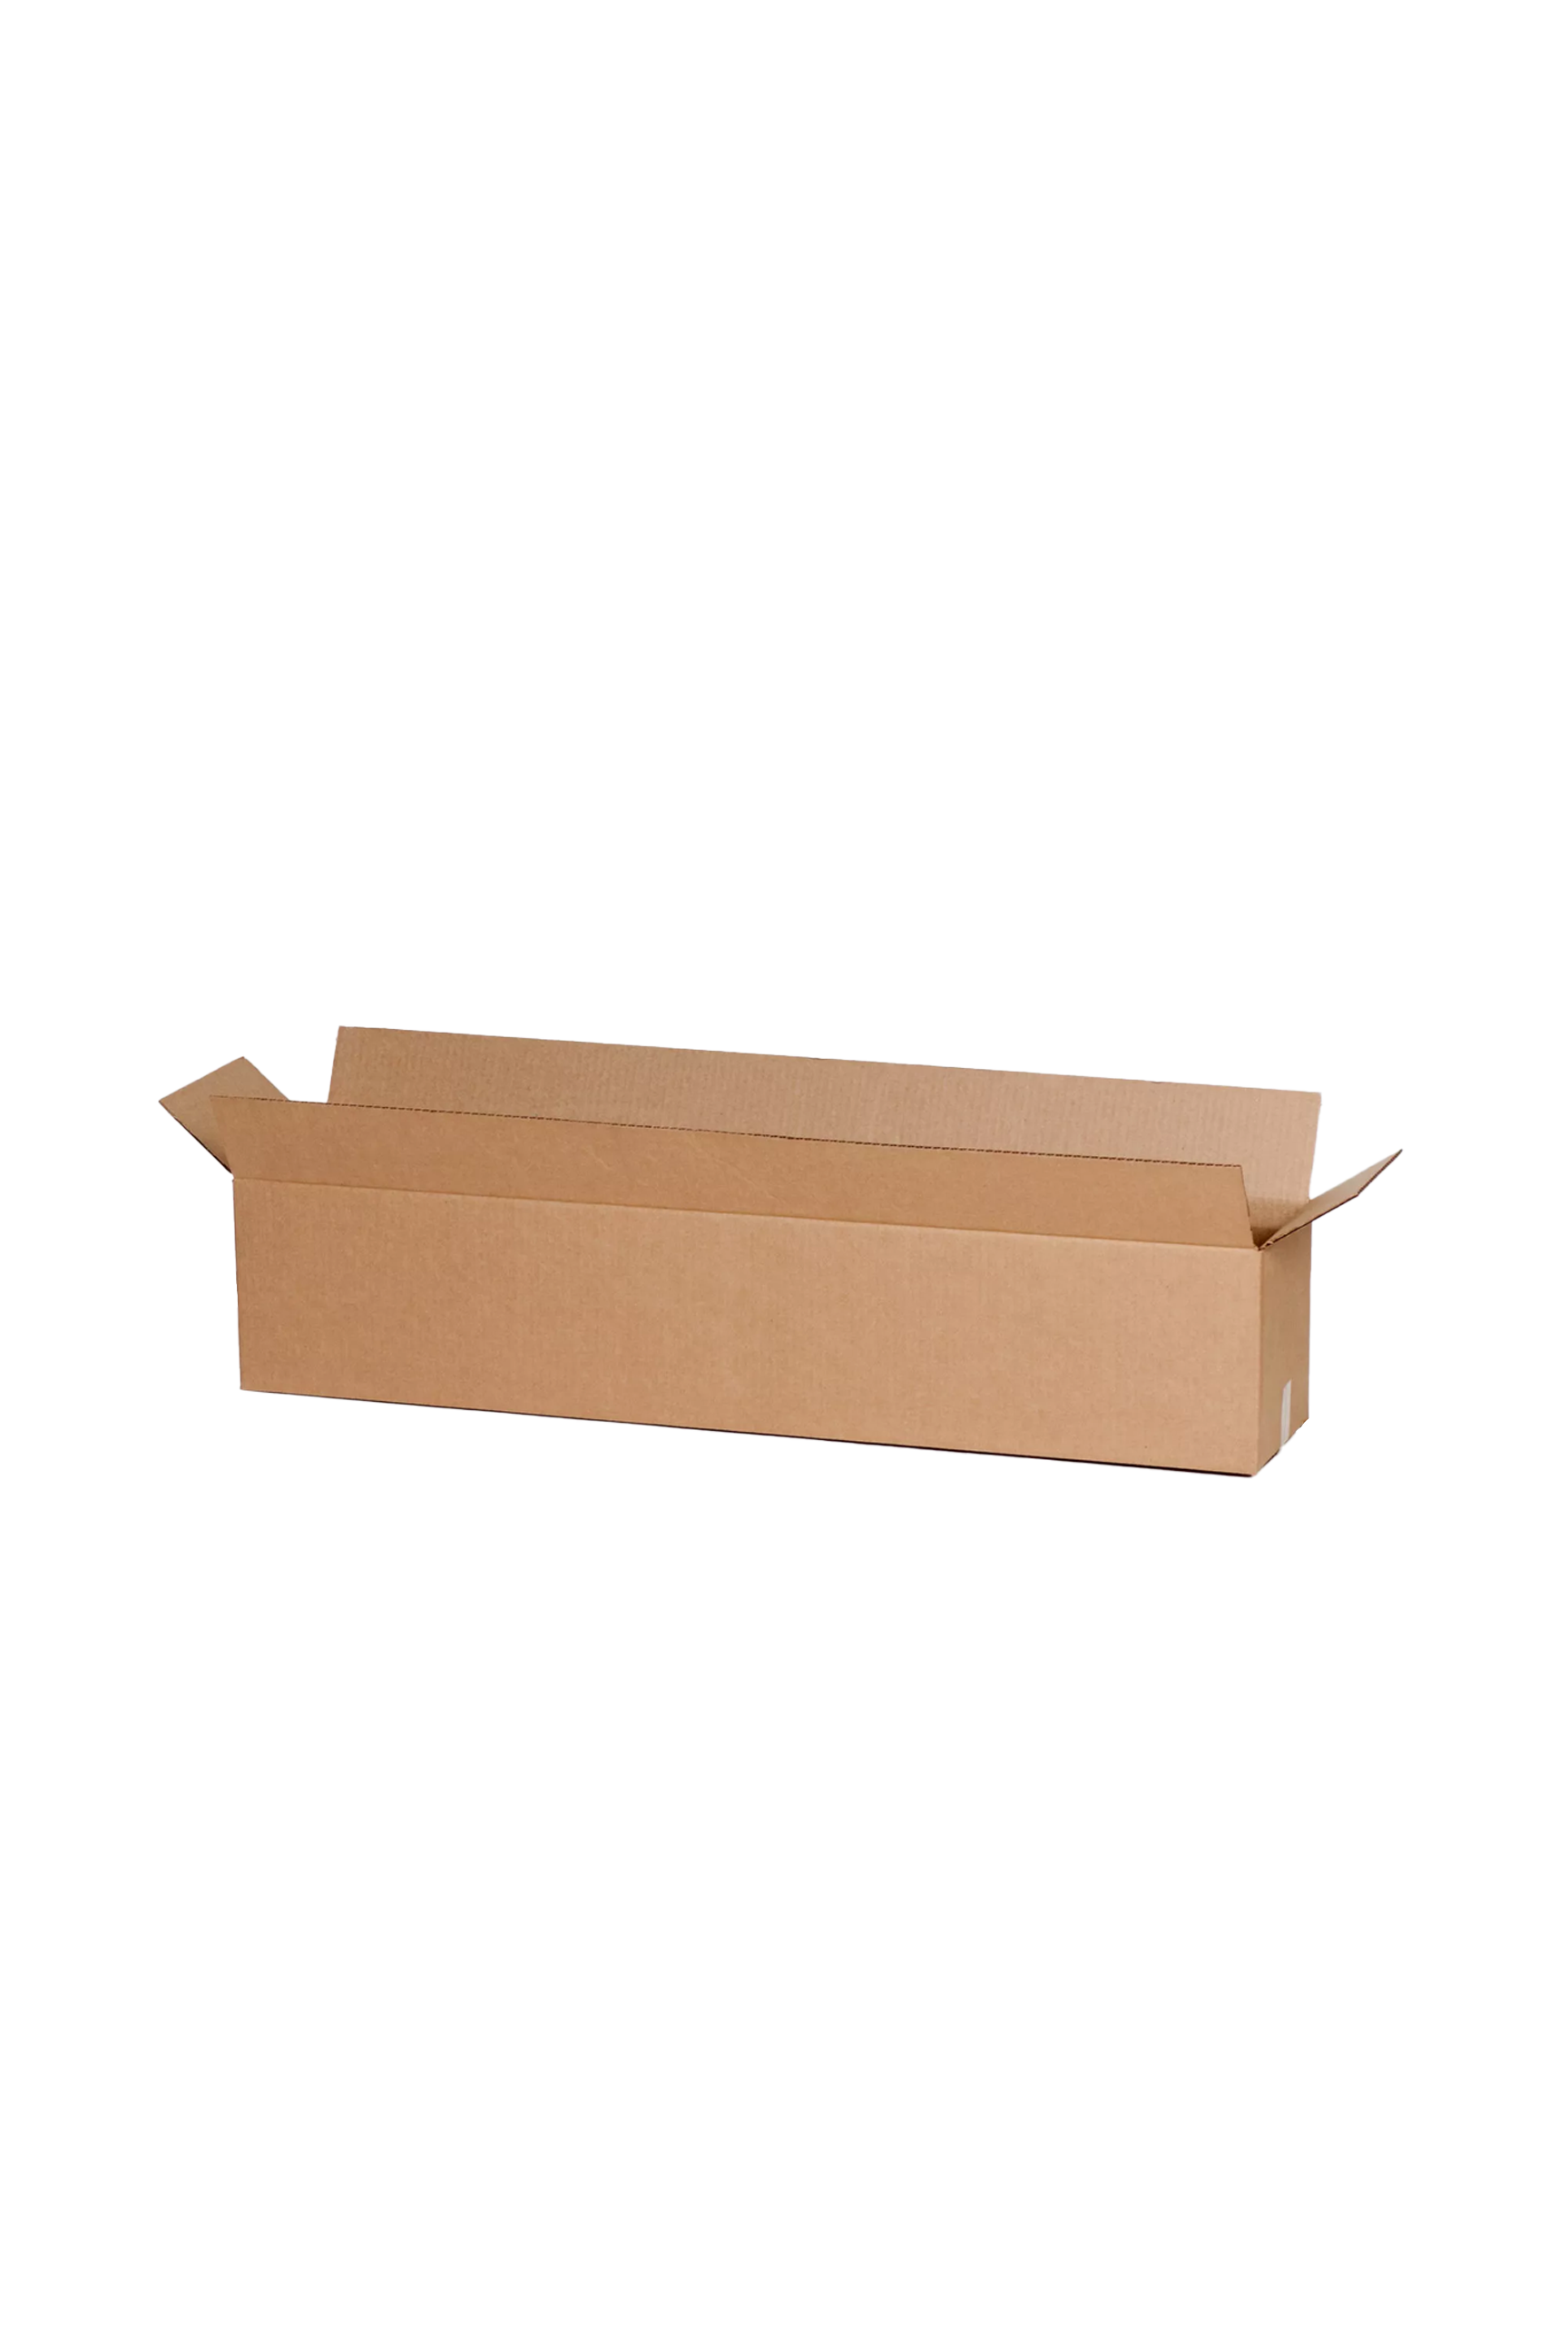 5 - Cardboard Sheets 24 x 36 Corrugated Kraft 9/32 Thick Double